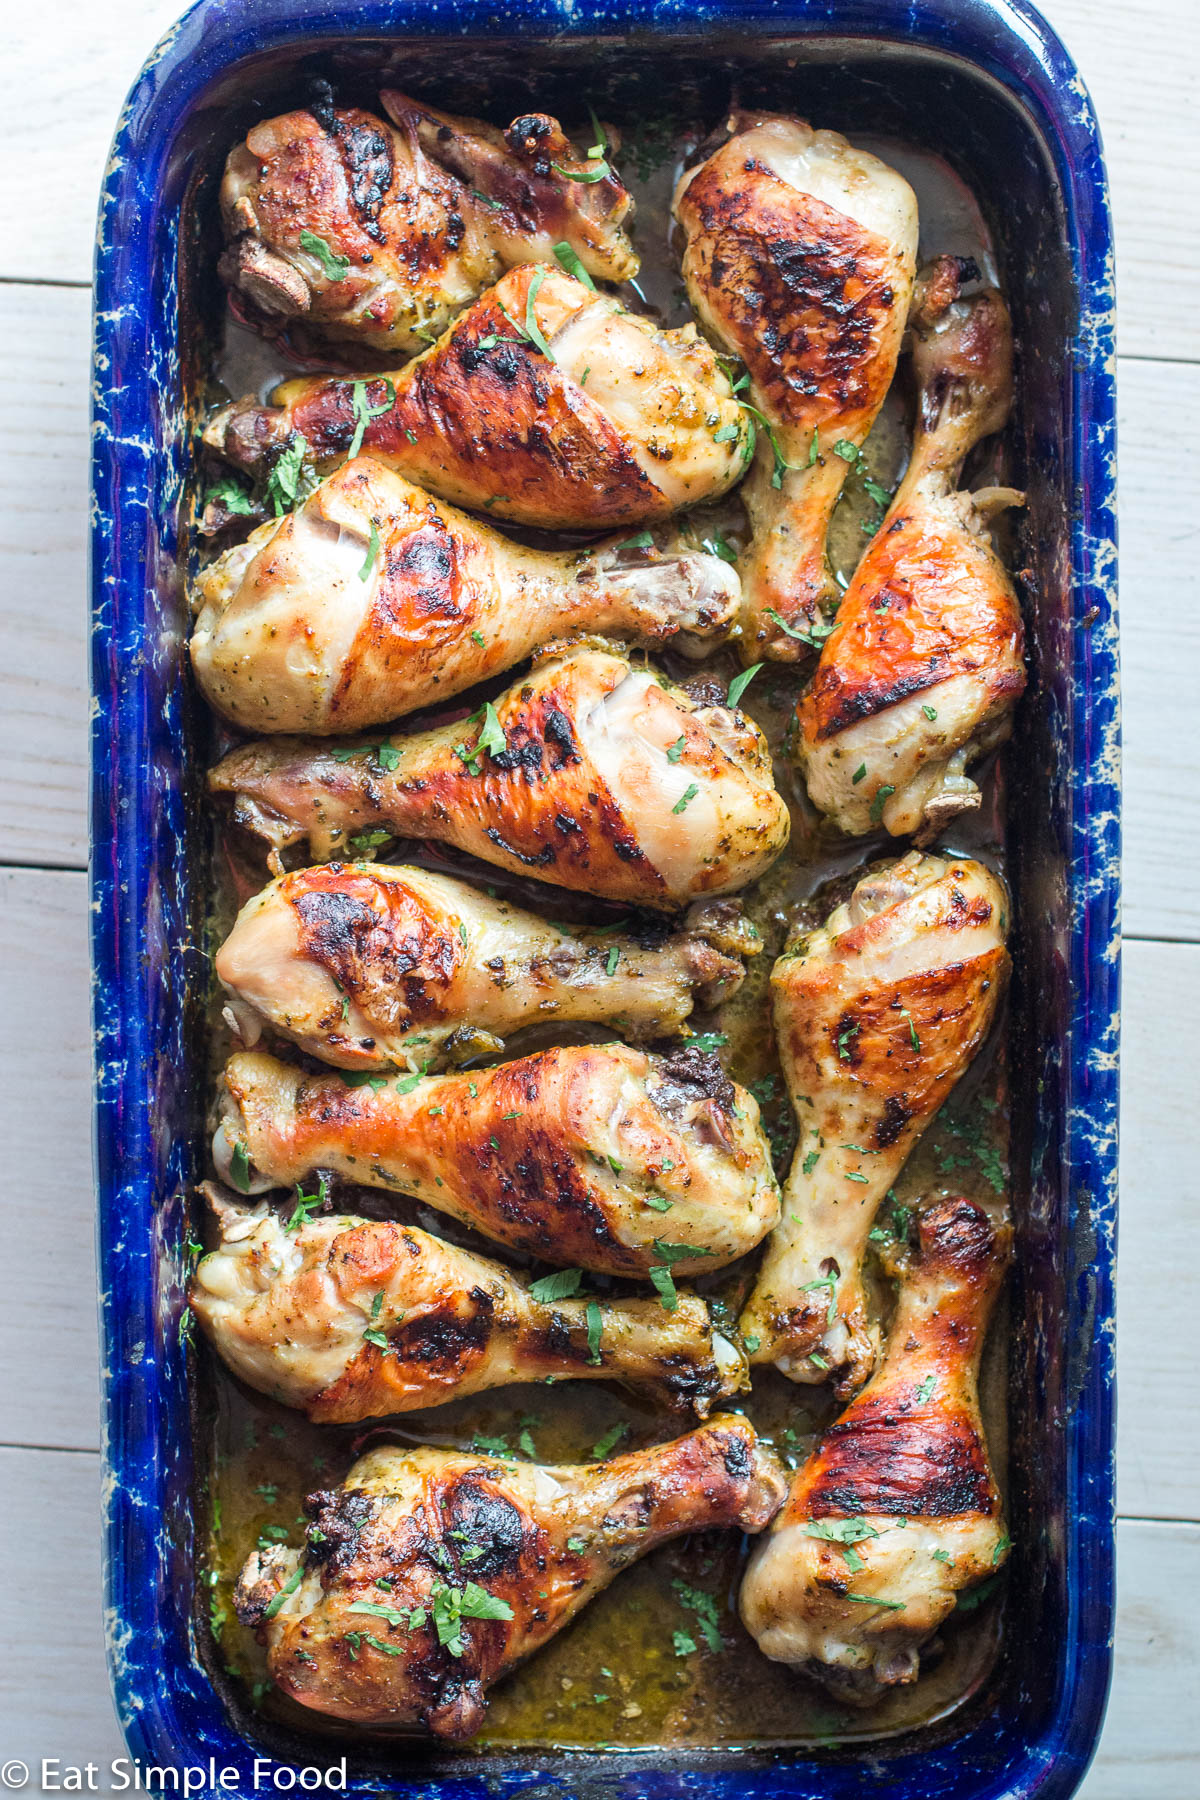 Brown Roasted Chicken legs in a cilantro sauce in a blue baking dish. Top view.